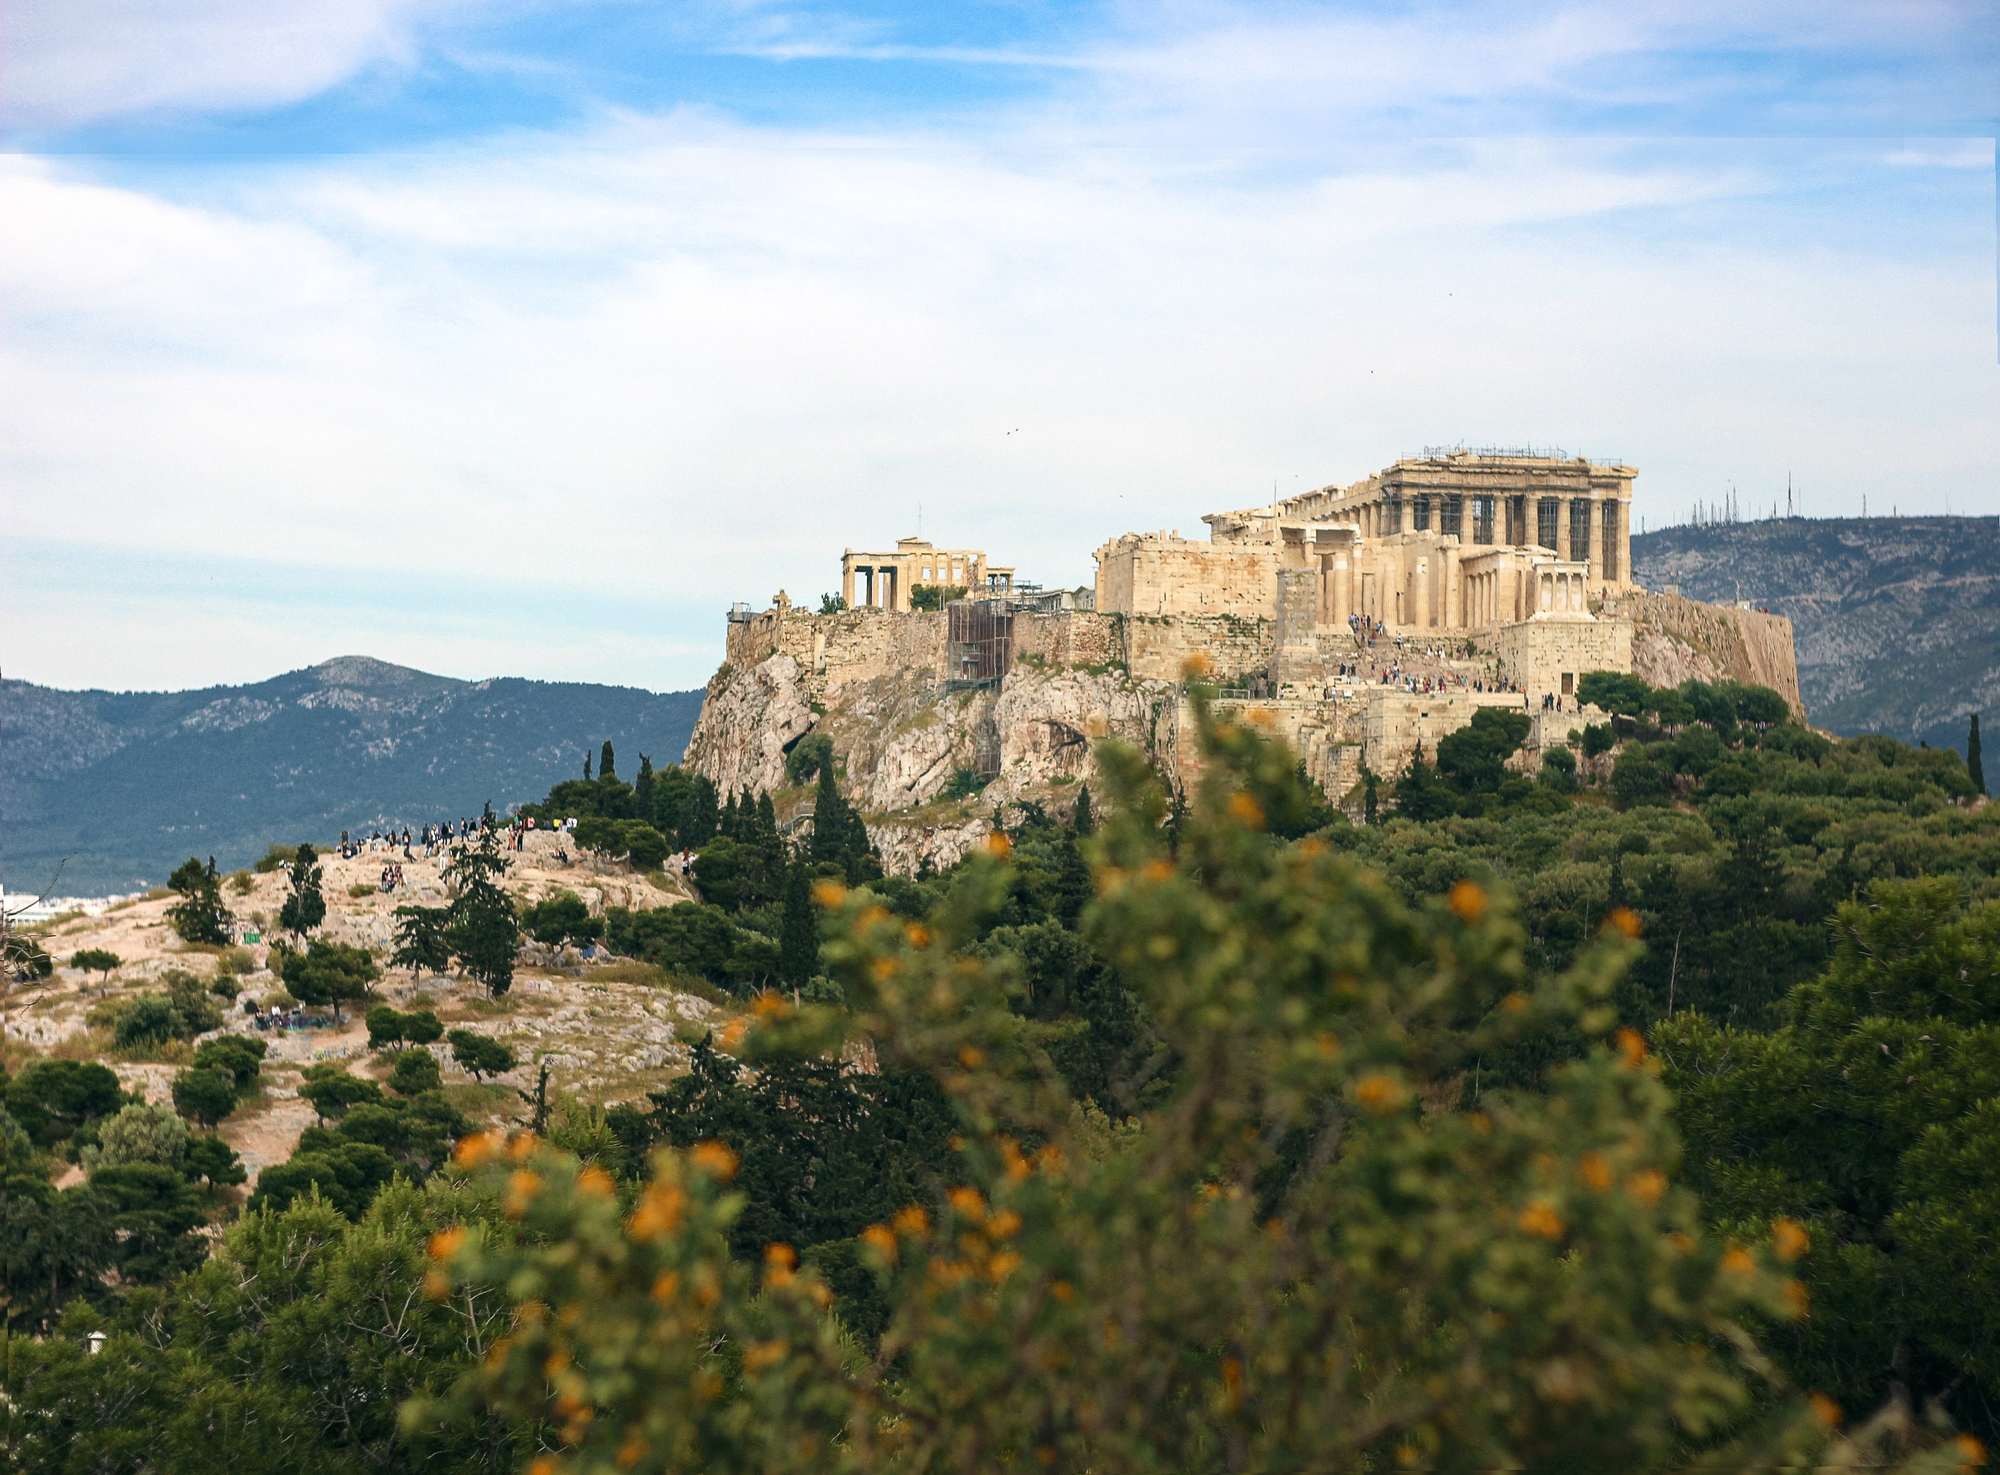 View of Areopagus, a giant hill with marble structure with columns in Athens Greece